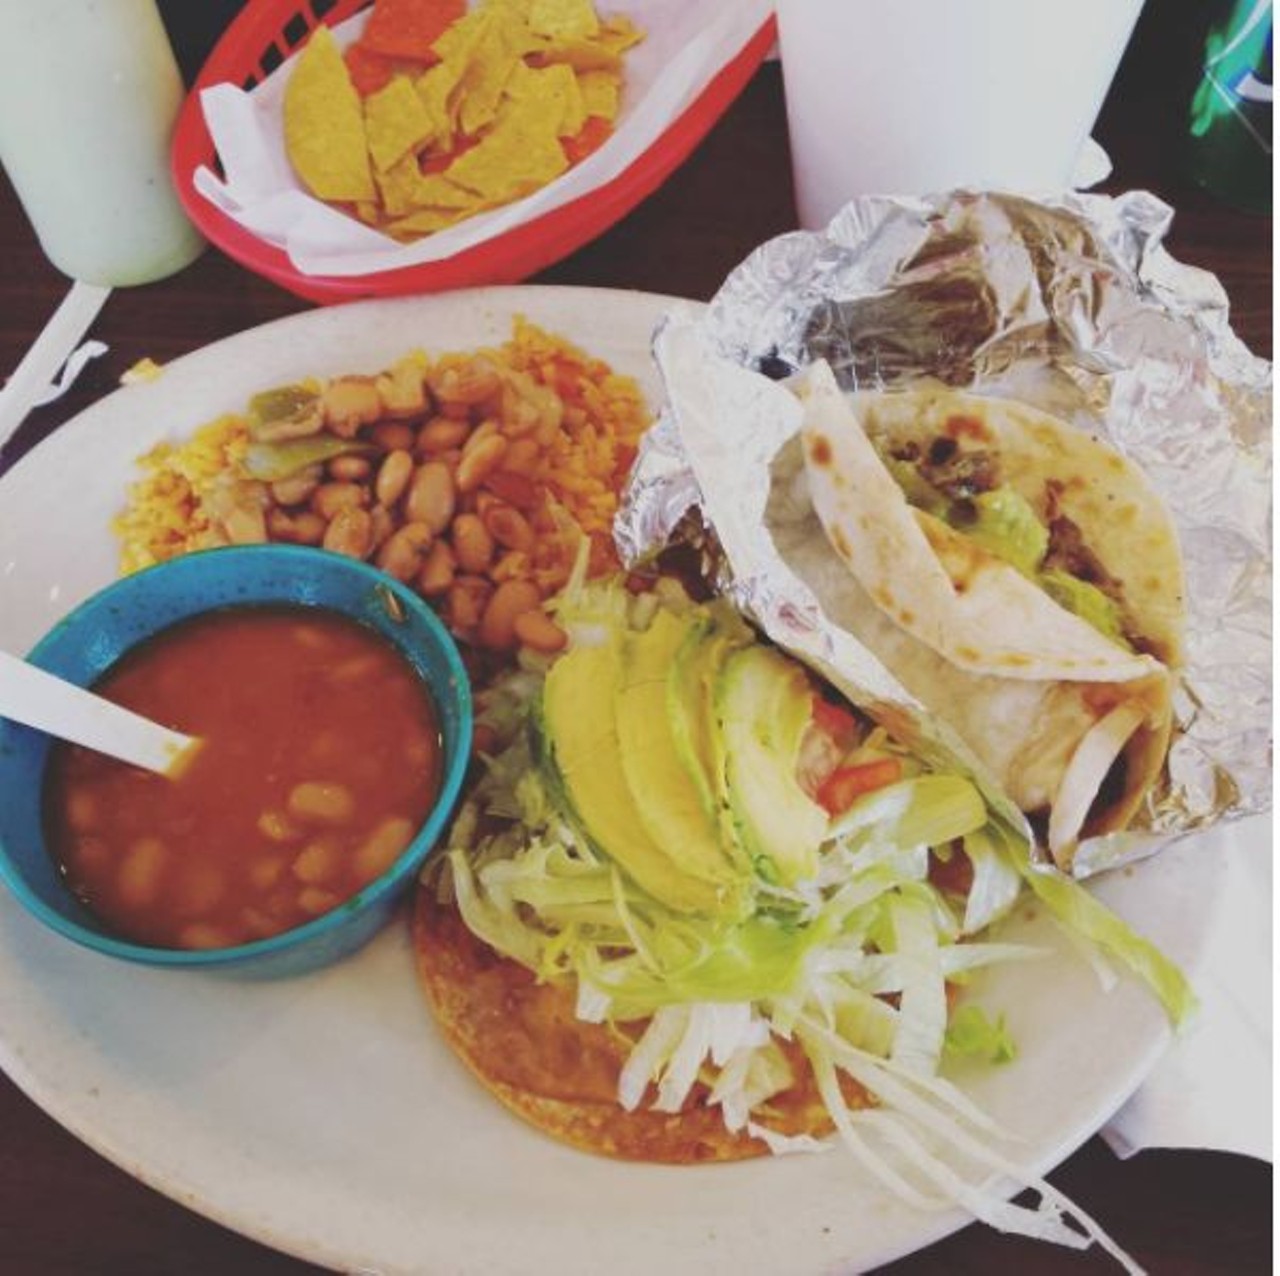 Taqueria Chapala Jalisco
1902 McCullough Ave., (210) 735-5352
Their mini taco plate is fit for a king. 
Photo via Instagram, deerrosey